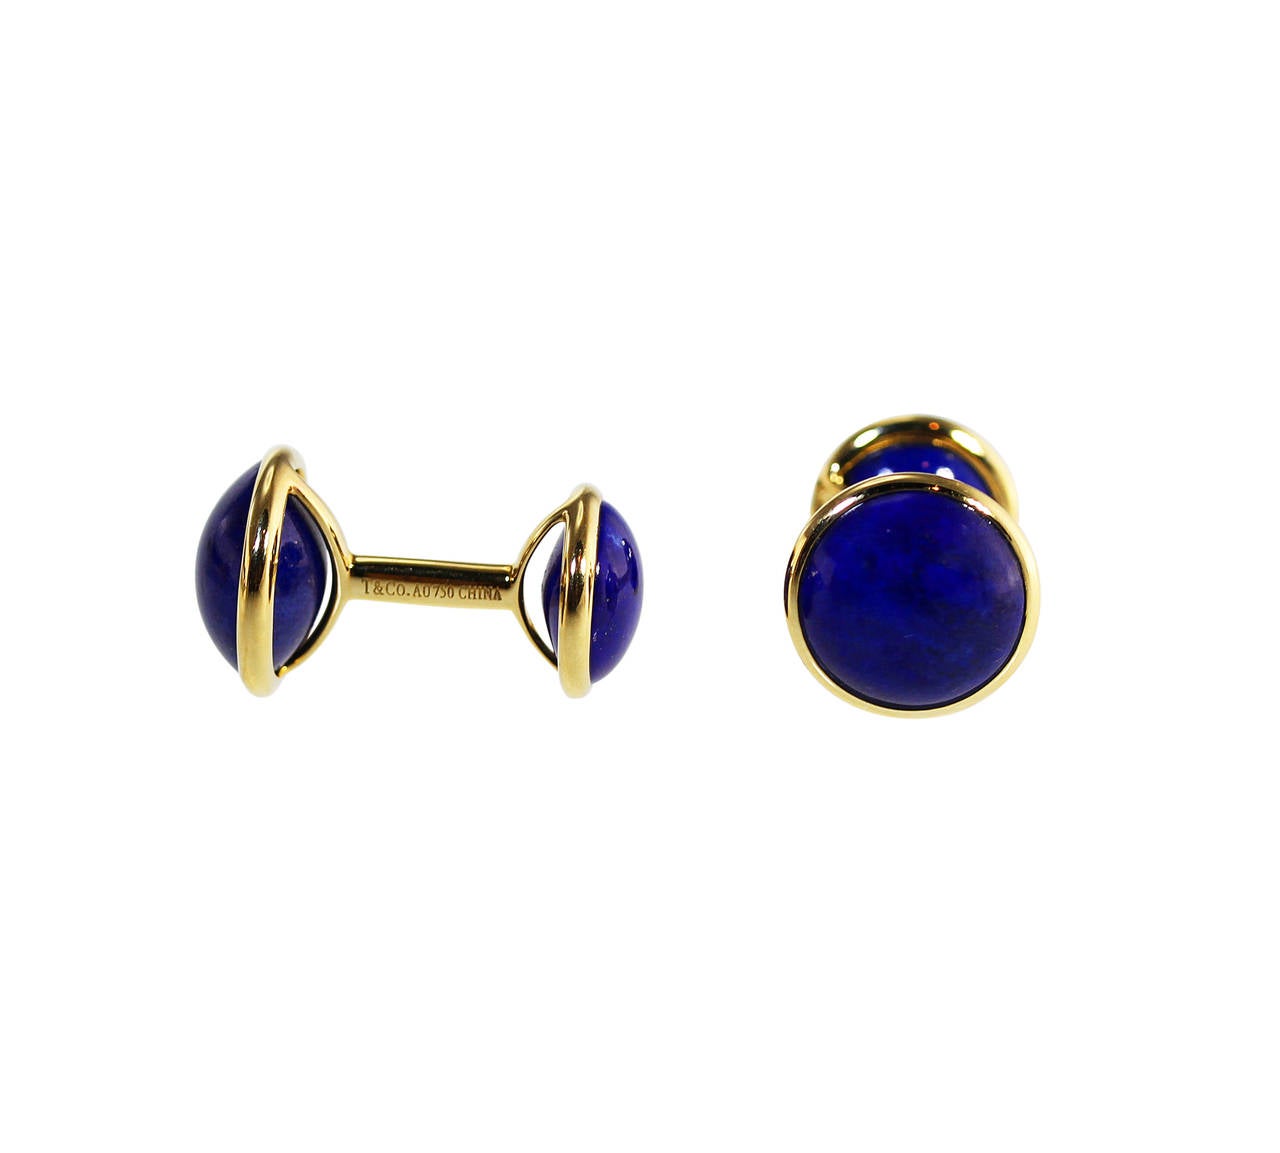 A pair of 18 karat yellow gold and lapis lazuli cufflinks by Elsa Peretti for Tiffany & Co., the terminals set with 4 cabochon lapis lazuli, gross weight 9.4 grams, measuring 1 by 1/2 inch, signed Elsa Peretti and T & Co., stamped AU 750 China, with